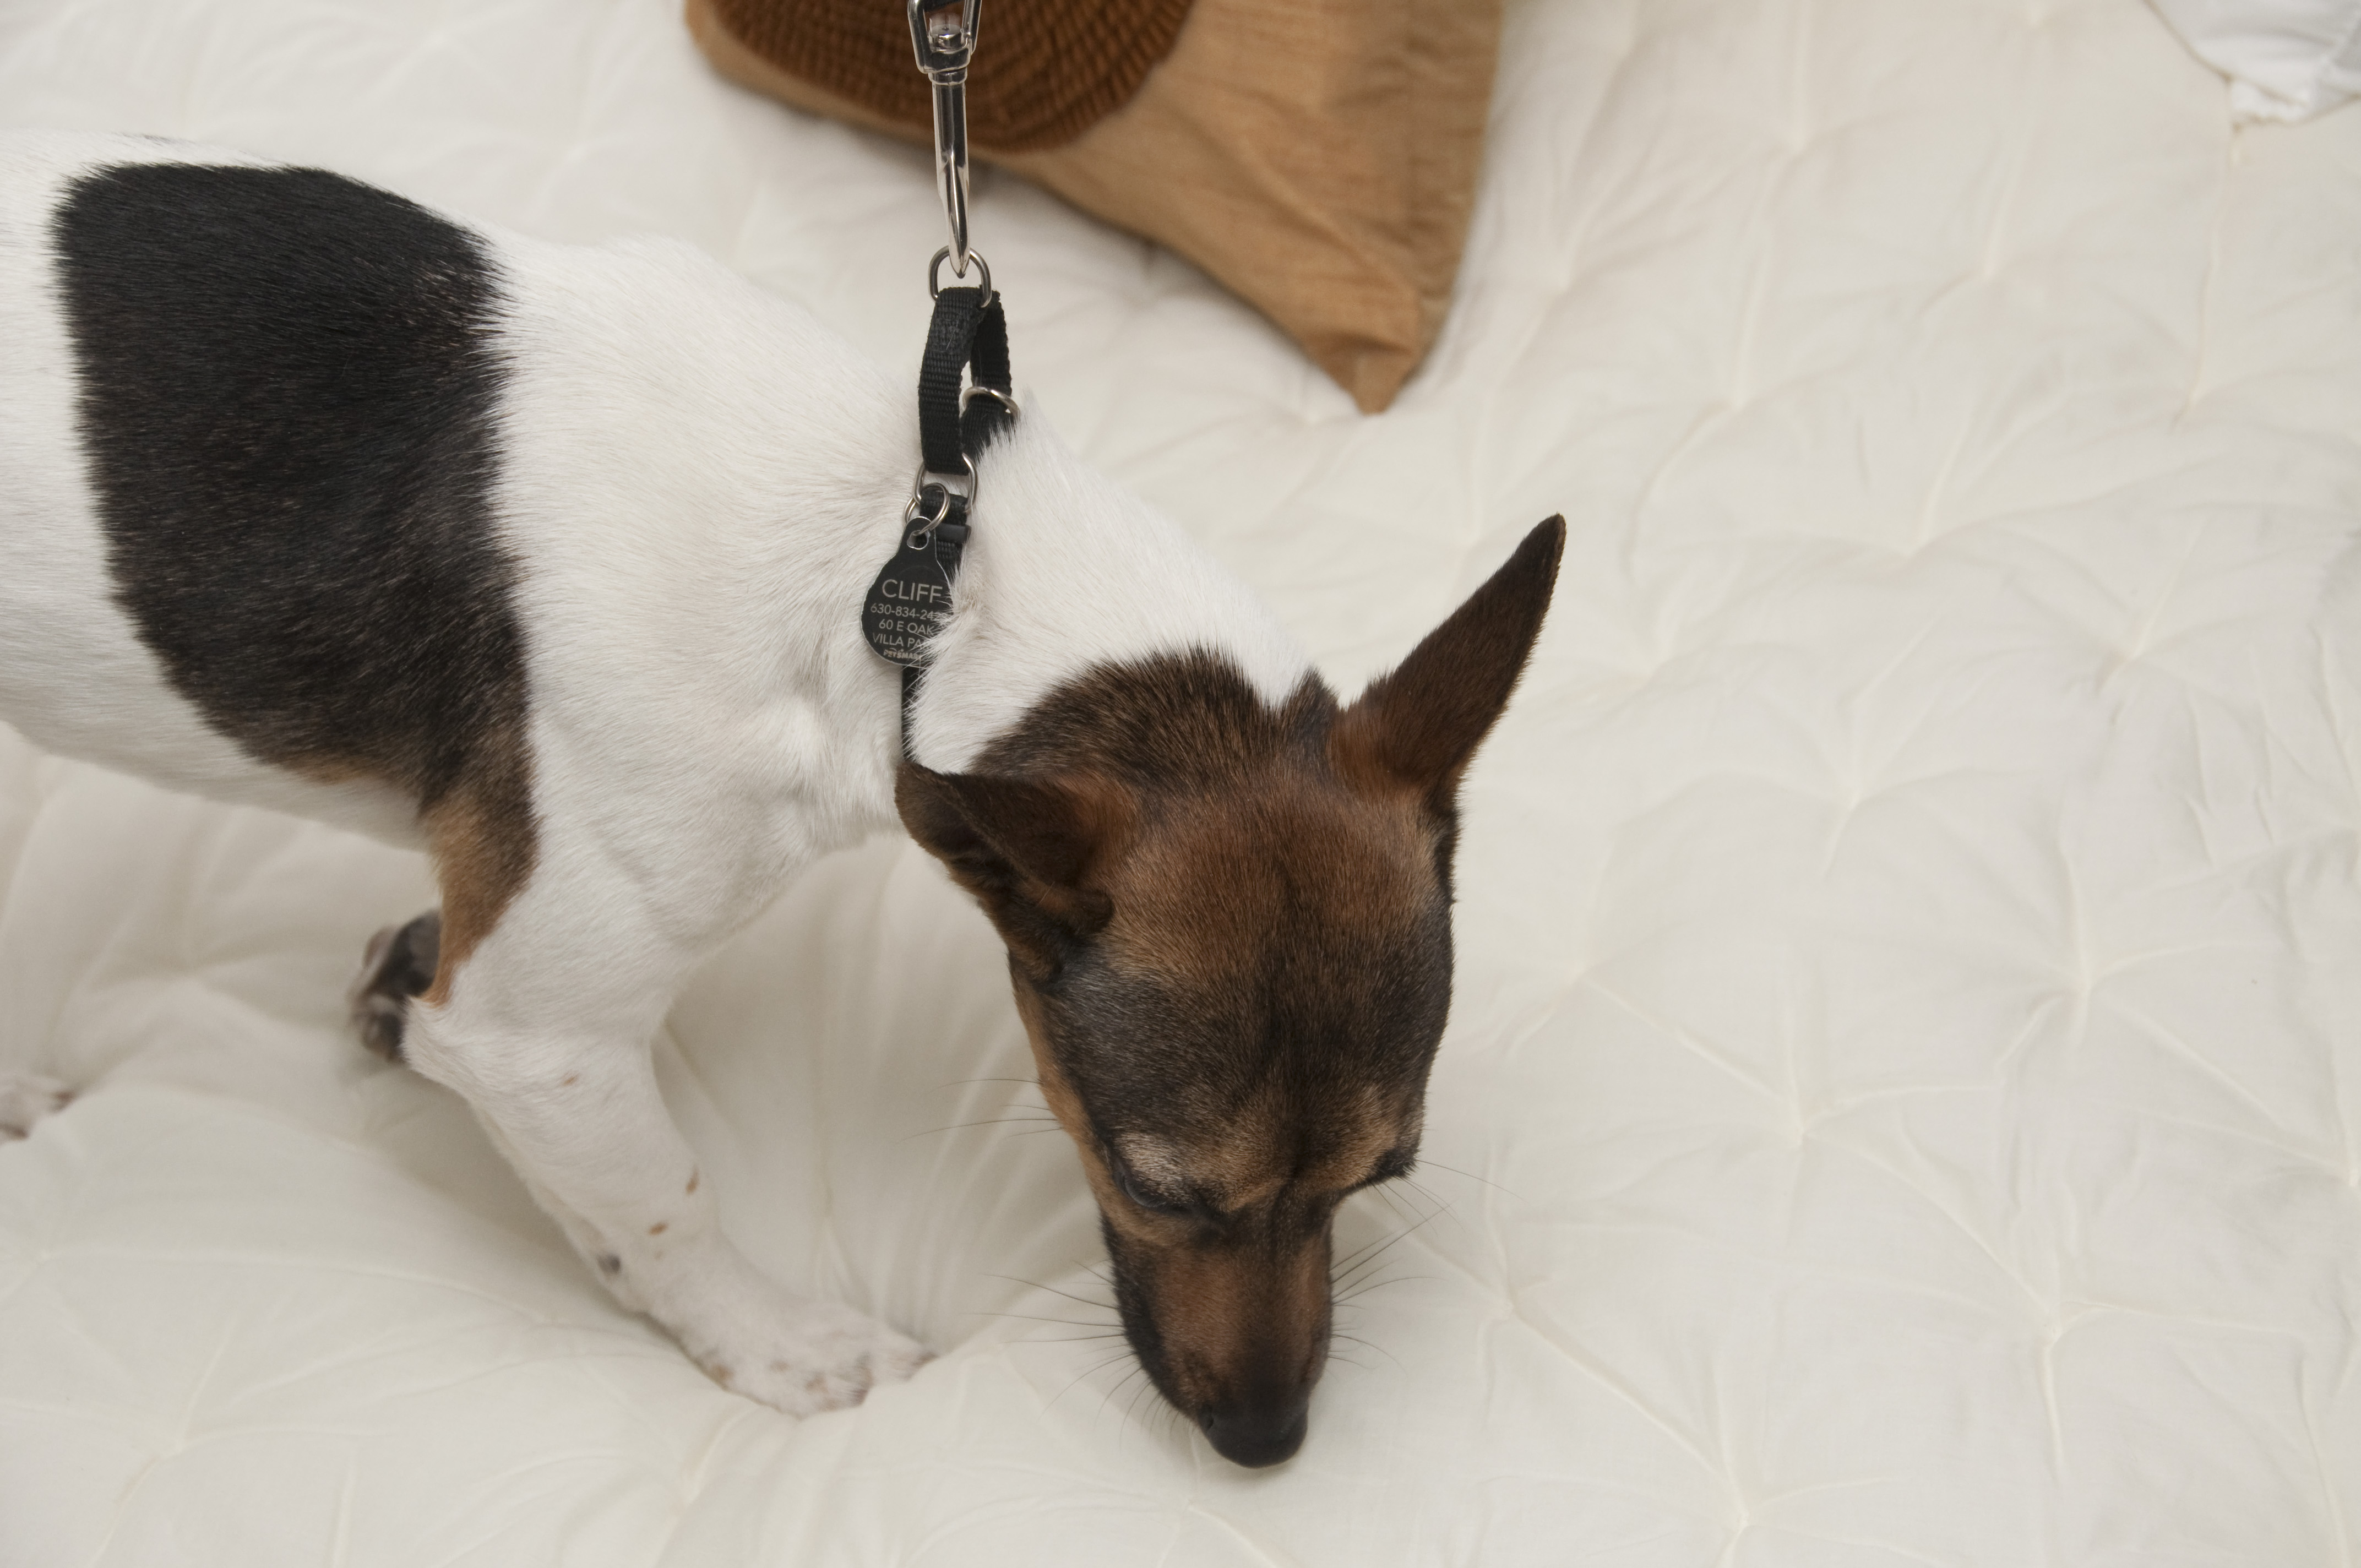 Bed Bug Dogs in the News. See where!